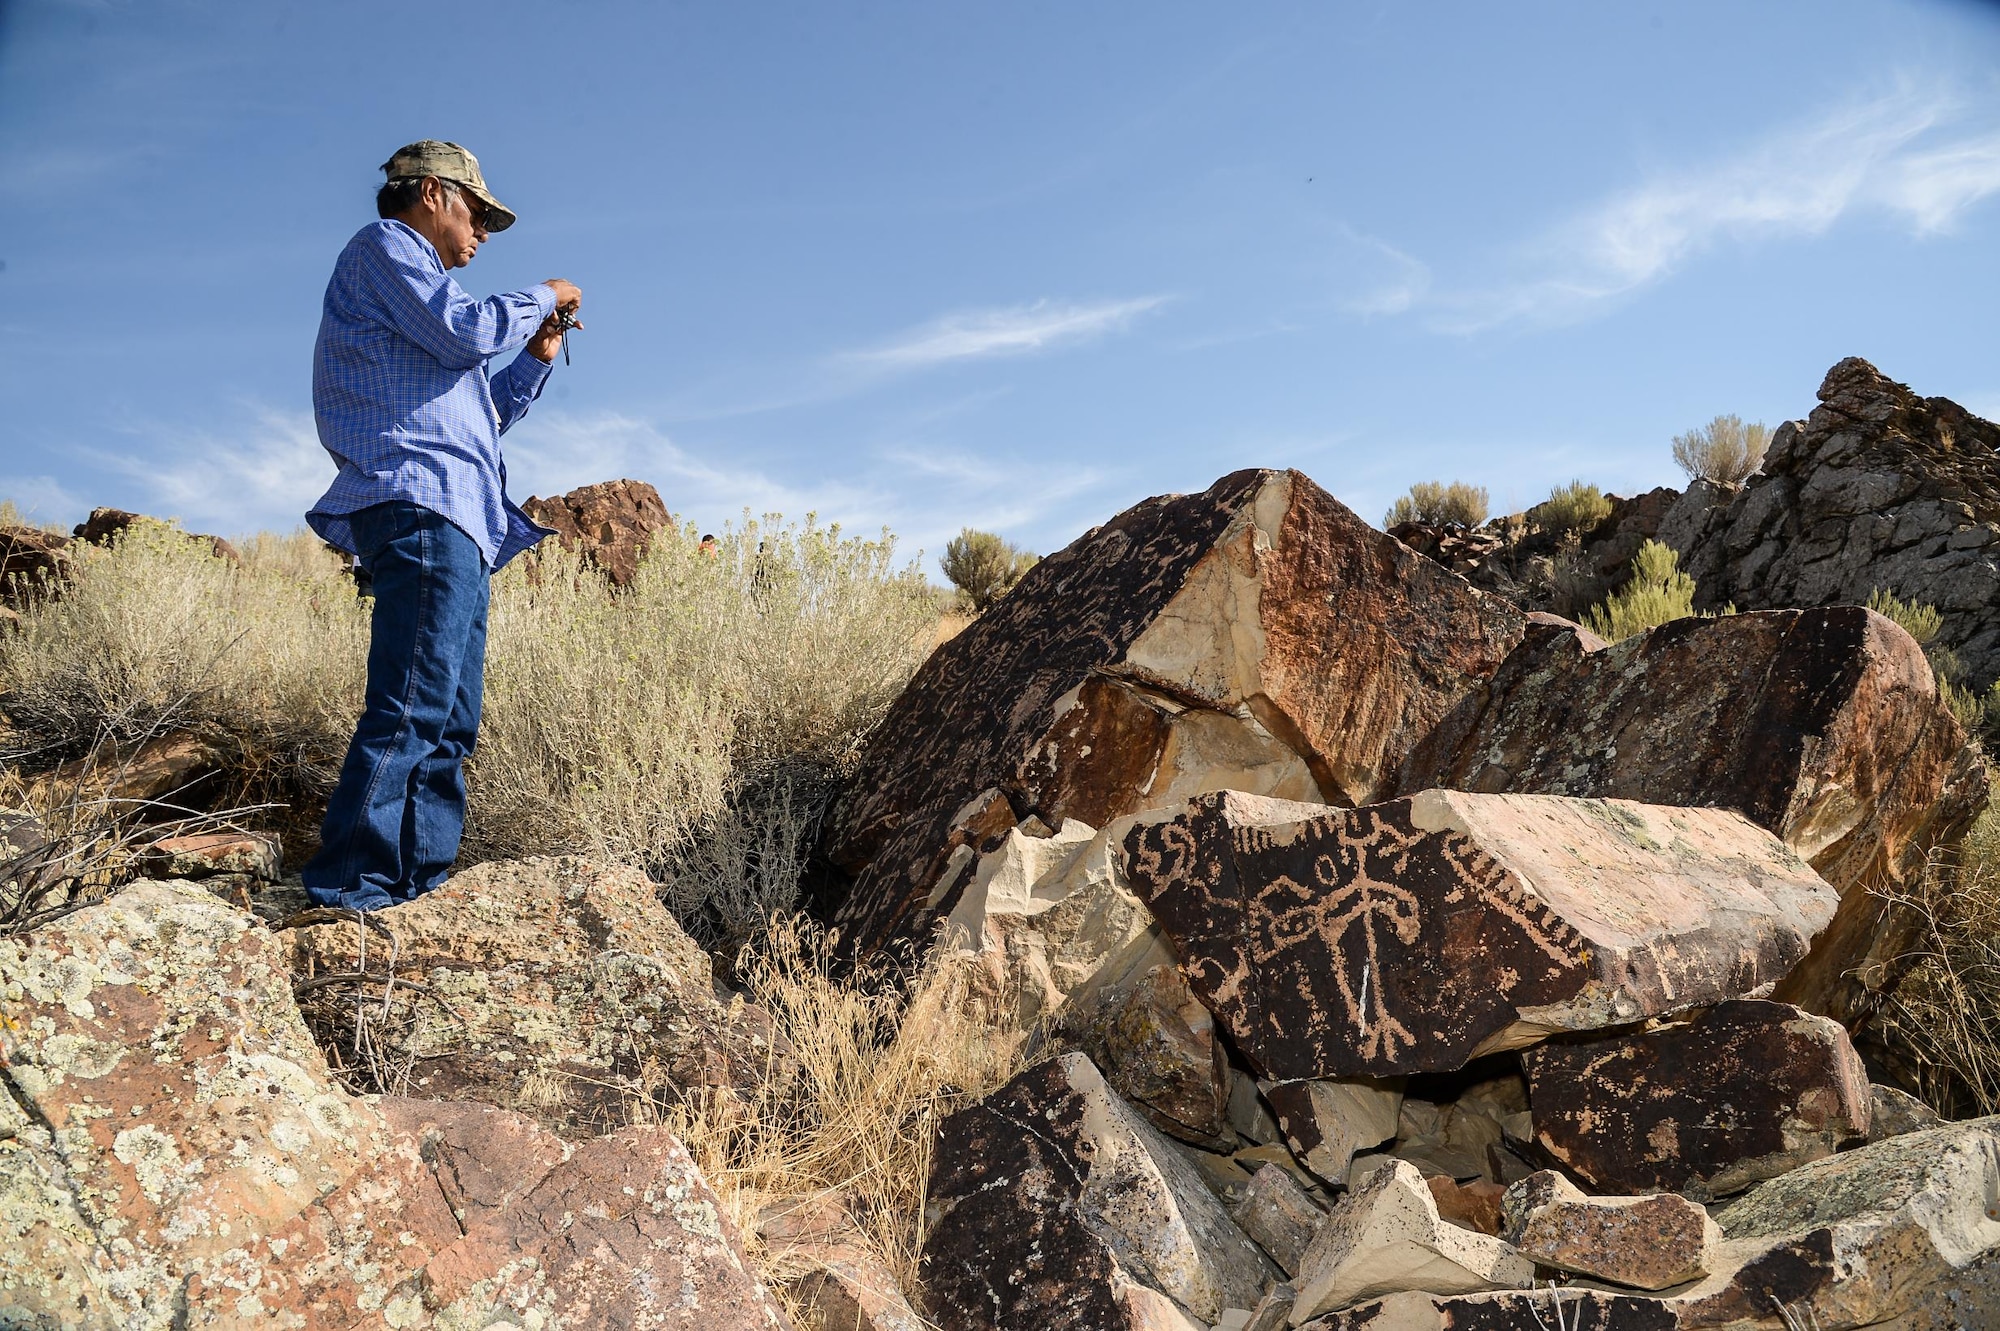 Rupert Steele of the Confederated Tribes of the Goshute Reservation takes a photo during a tour of a petroglyph site in Box Elder County, Utah, Aug. 26, 2016. The tour was part of the 2016 Annual American Indian Meeting, an event which provides a face-to-face forum for tribal leaders and federal agencies to discuss tribal concerns on federally managed land. (U.S. Air Force photo by R. Nial Bradshaw)